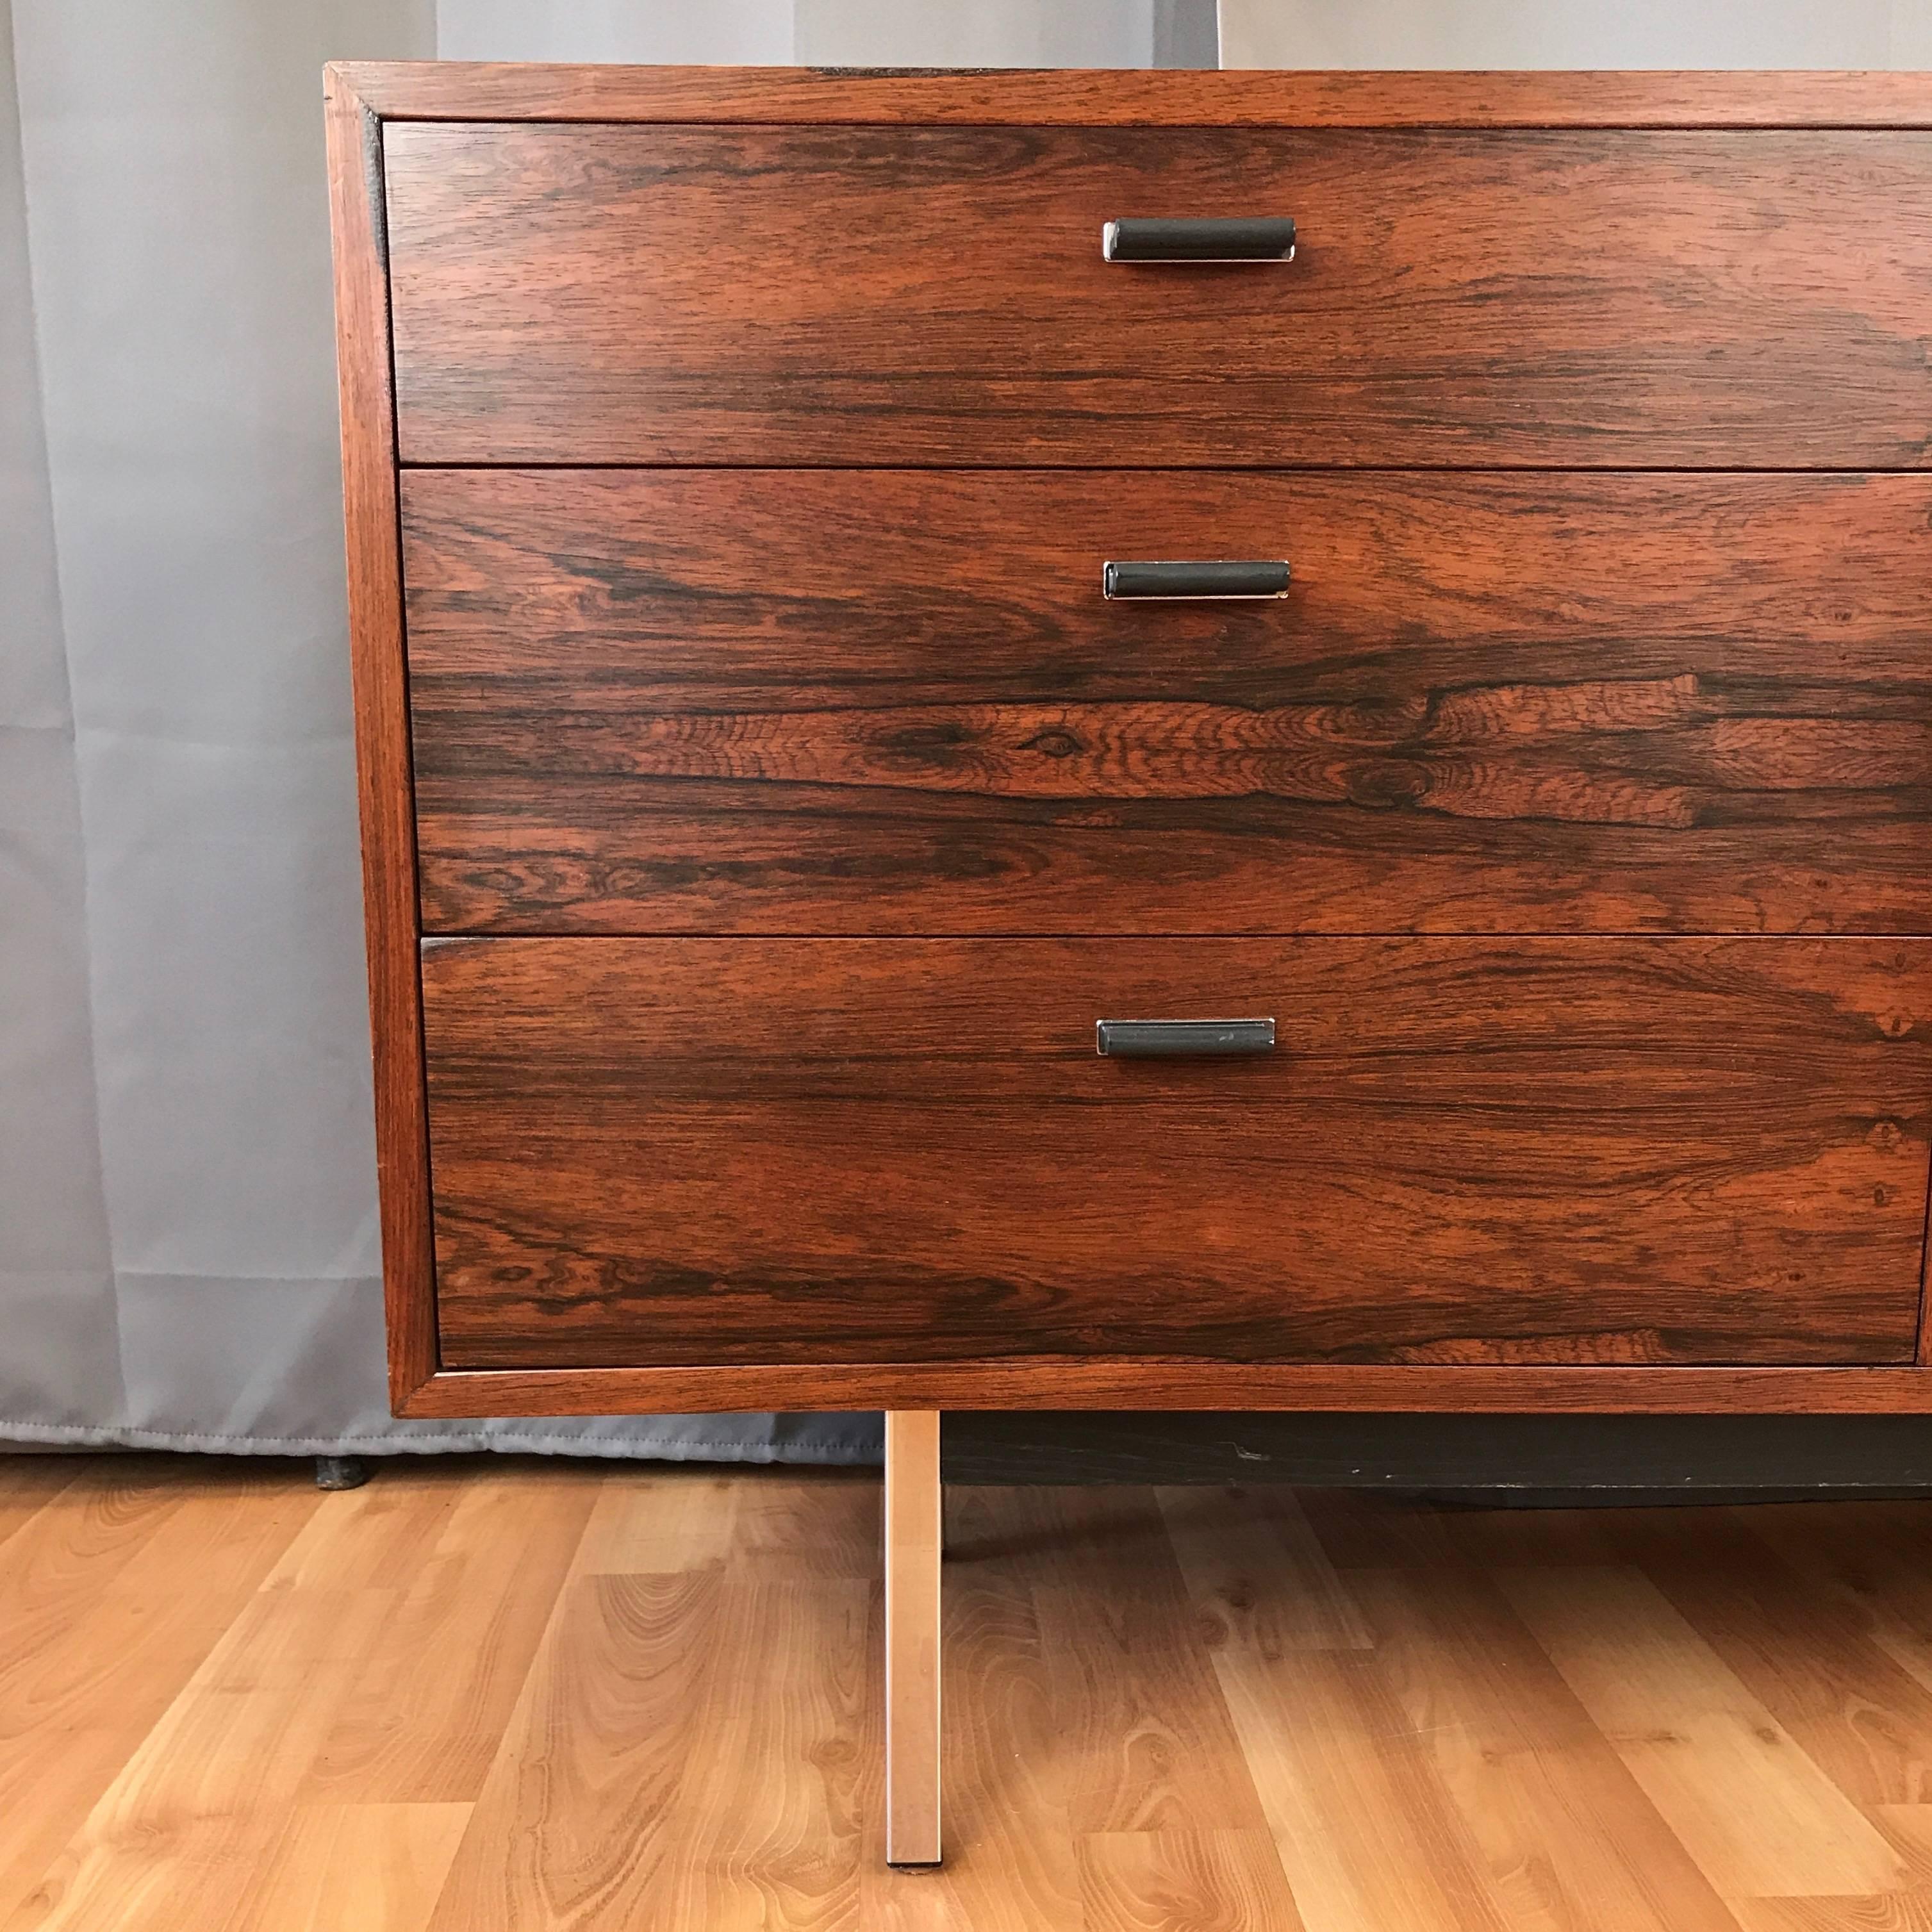 An exceptionally handsome and expansive midcentury nine-drawer rosewood dresser in the style of Harvey Probber.

Clean lines and nicely figured book matched veneer throughout. Crisp grain pattern running uninterrupted across the top is especially